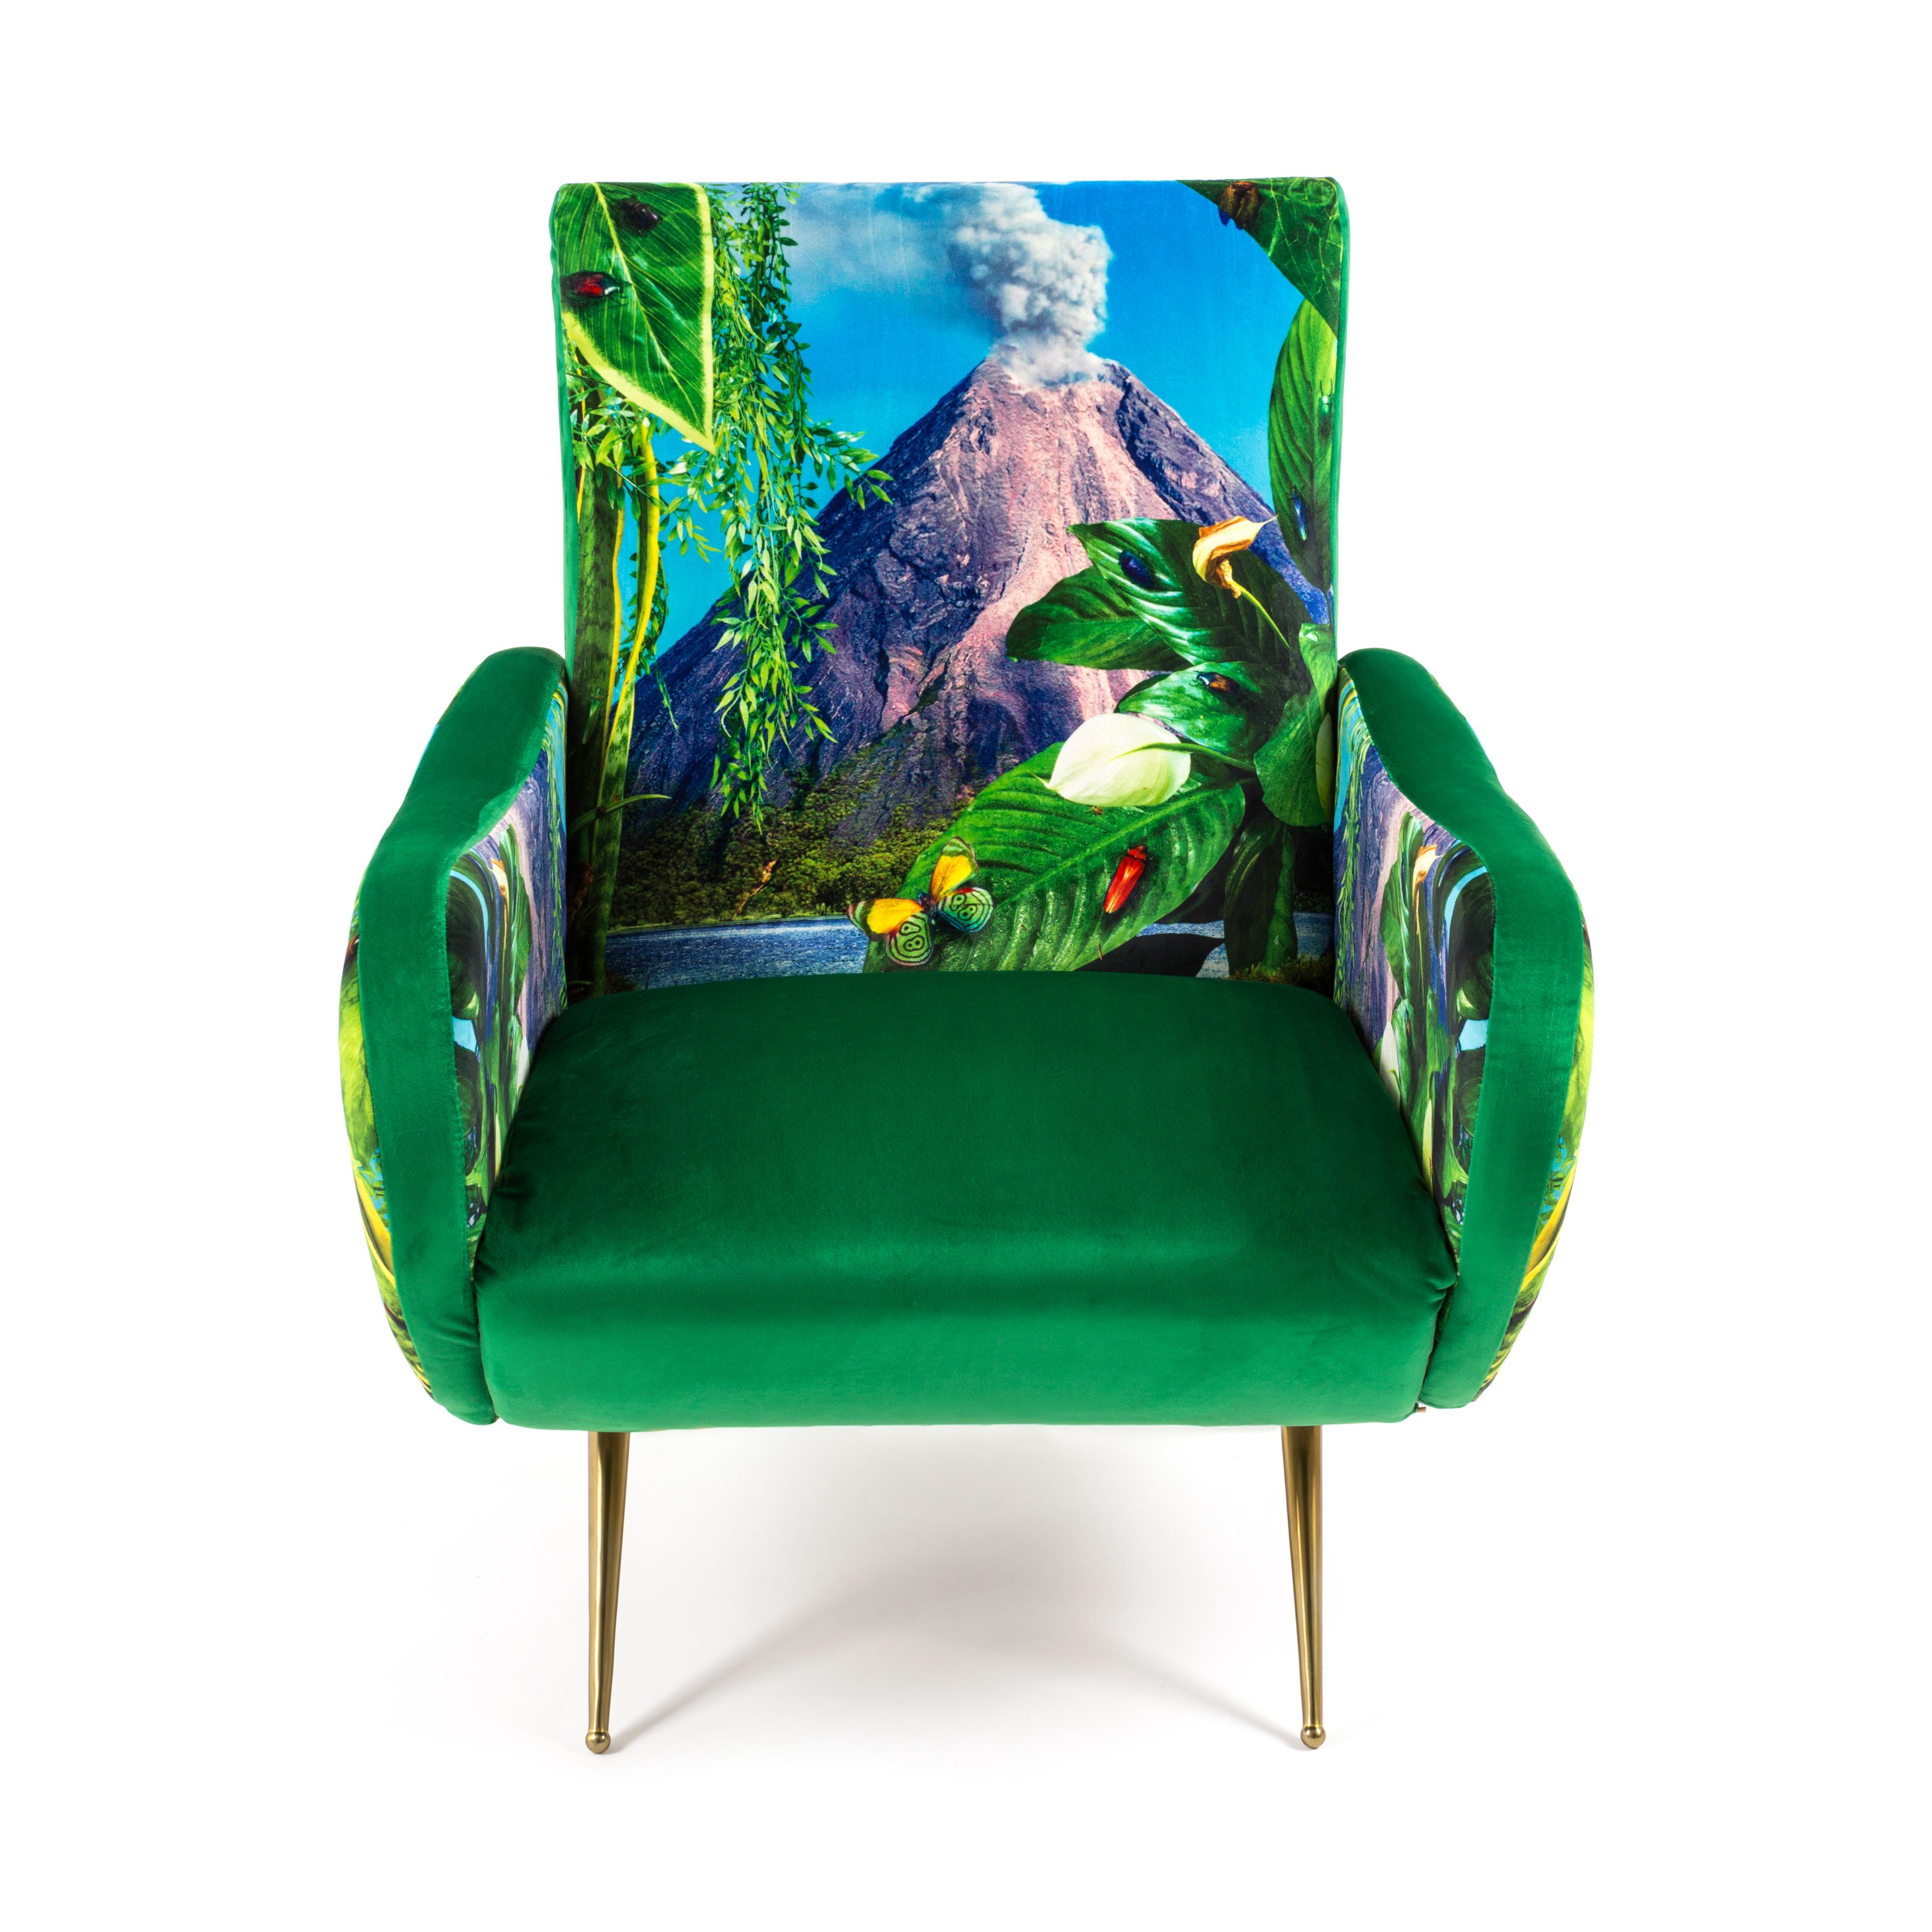 The Traditional design of these 1950s style seats are upholstered with unexpected surreal images. The images of the Toiletpaper magazine invade furniture and become comfortable objects to relax in – not only for art lovers’ homes.

- Material: